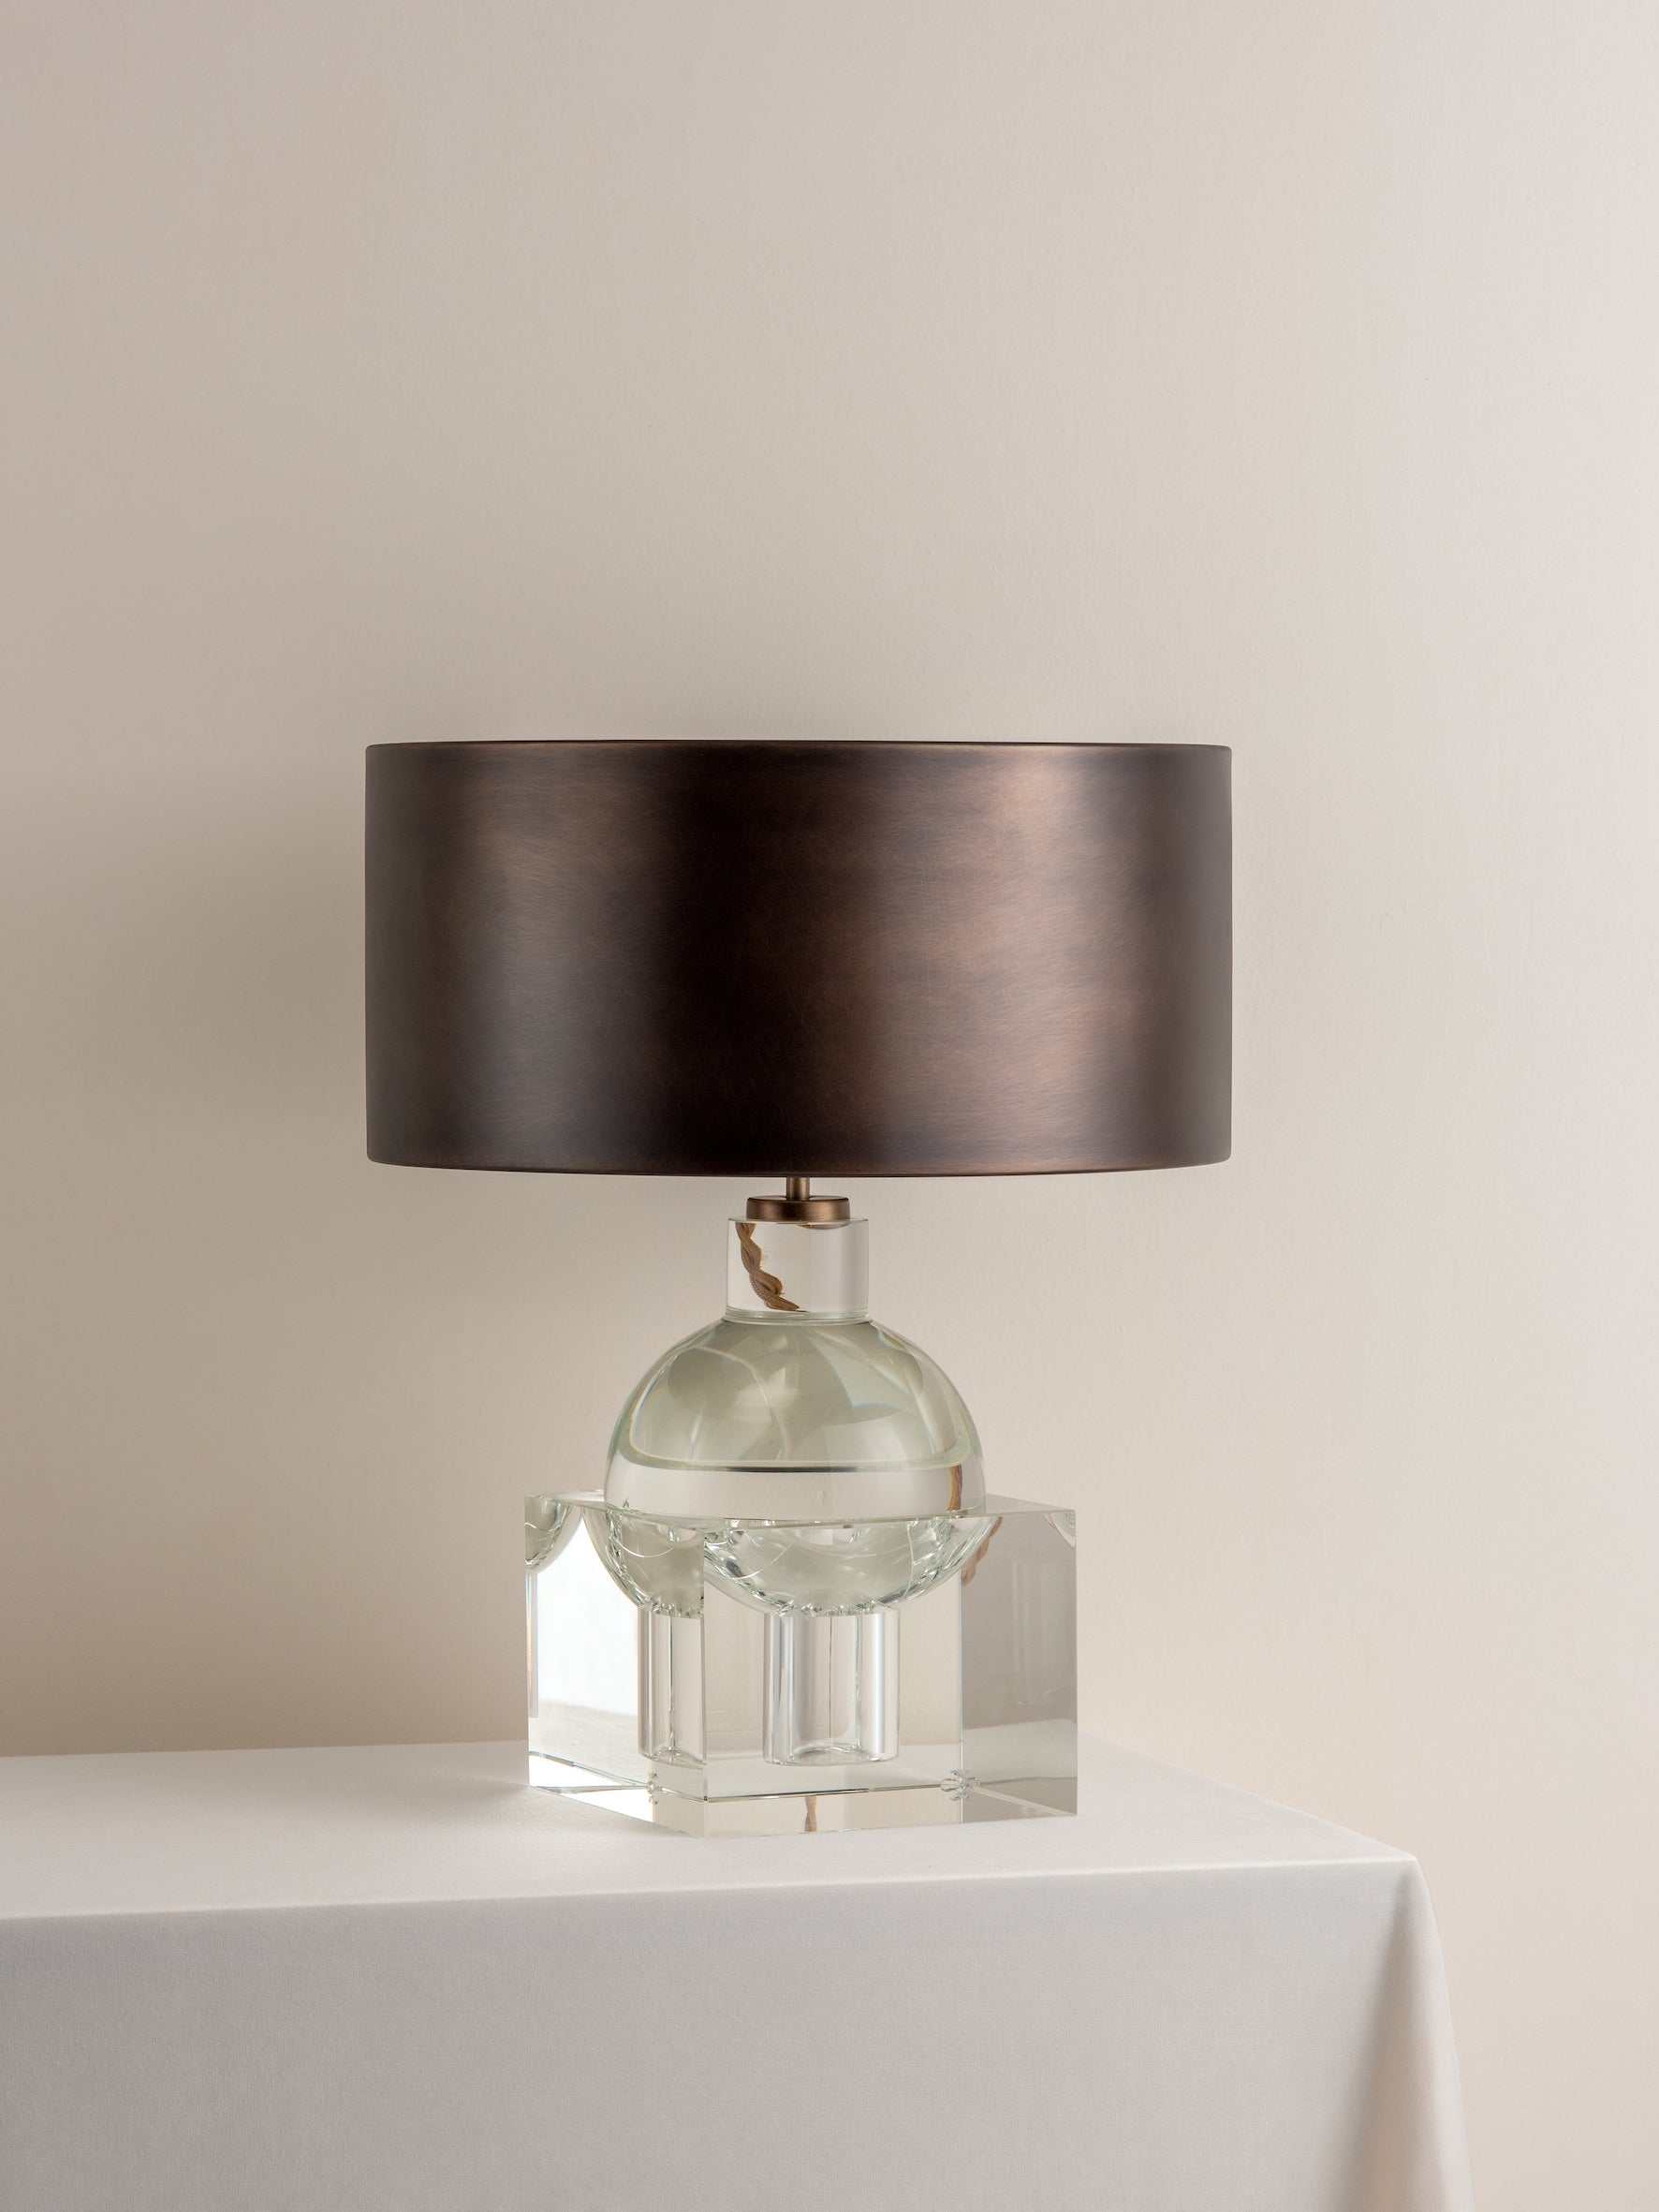 Editions crystal lamp with + bronze shade | Table Lamp | Lights & Lamps | UK | Modern Affordable Designer Lighting